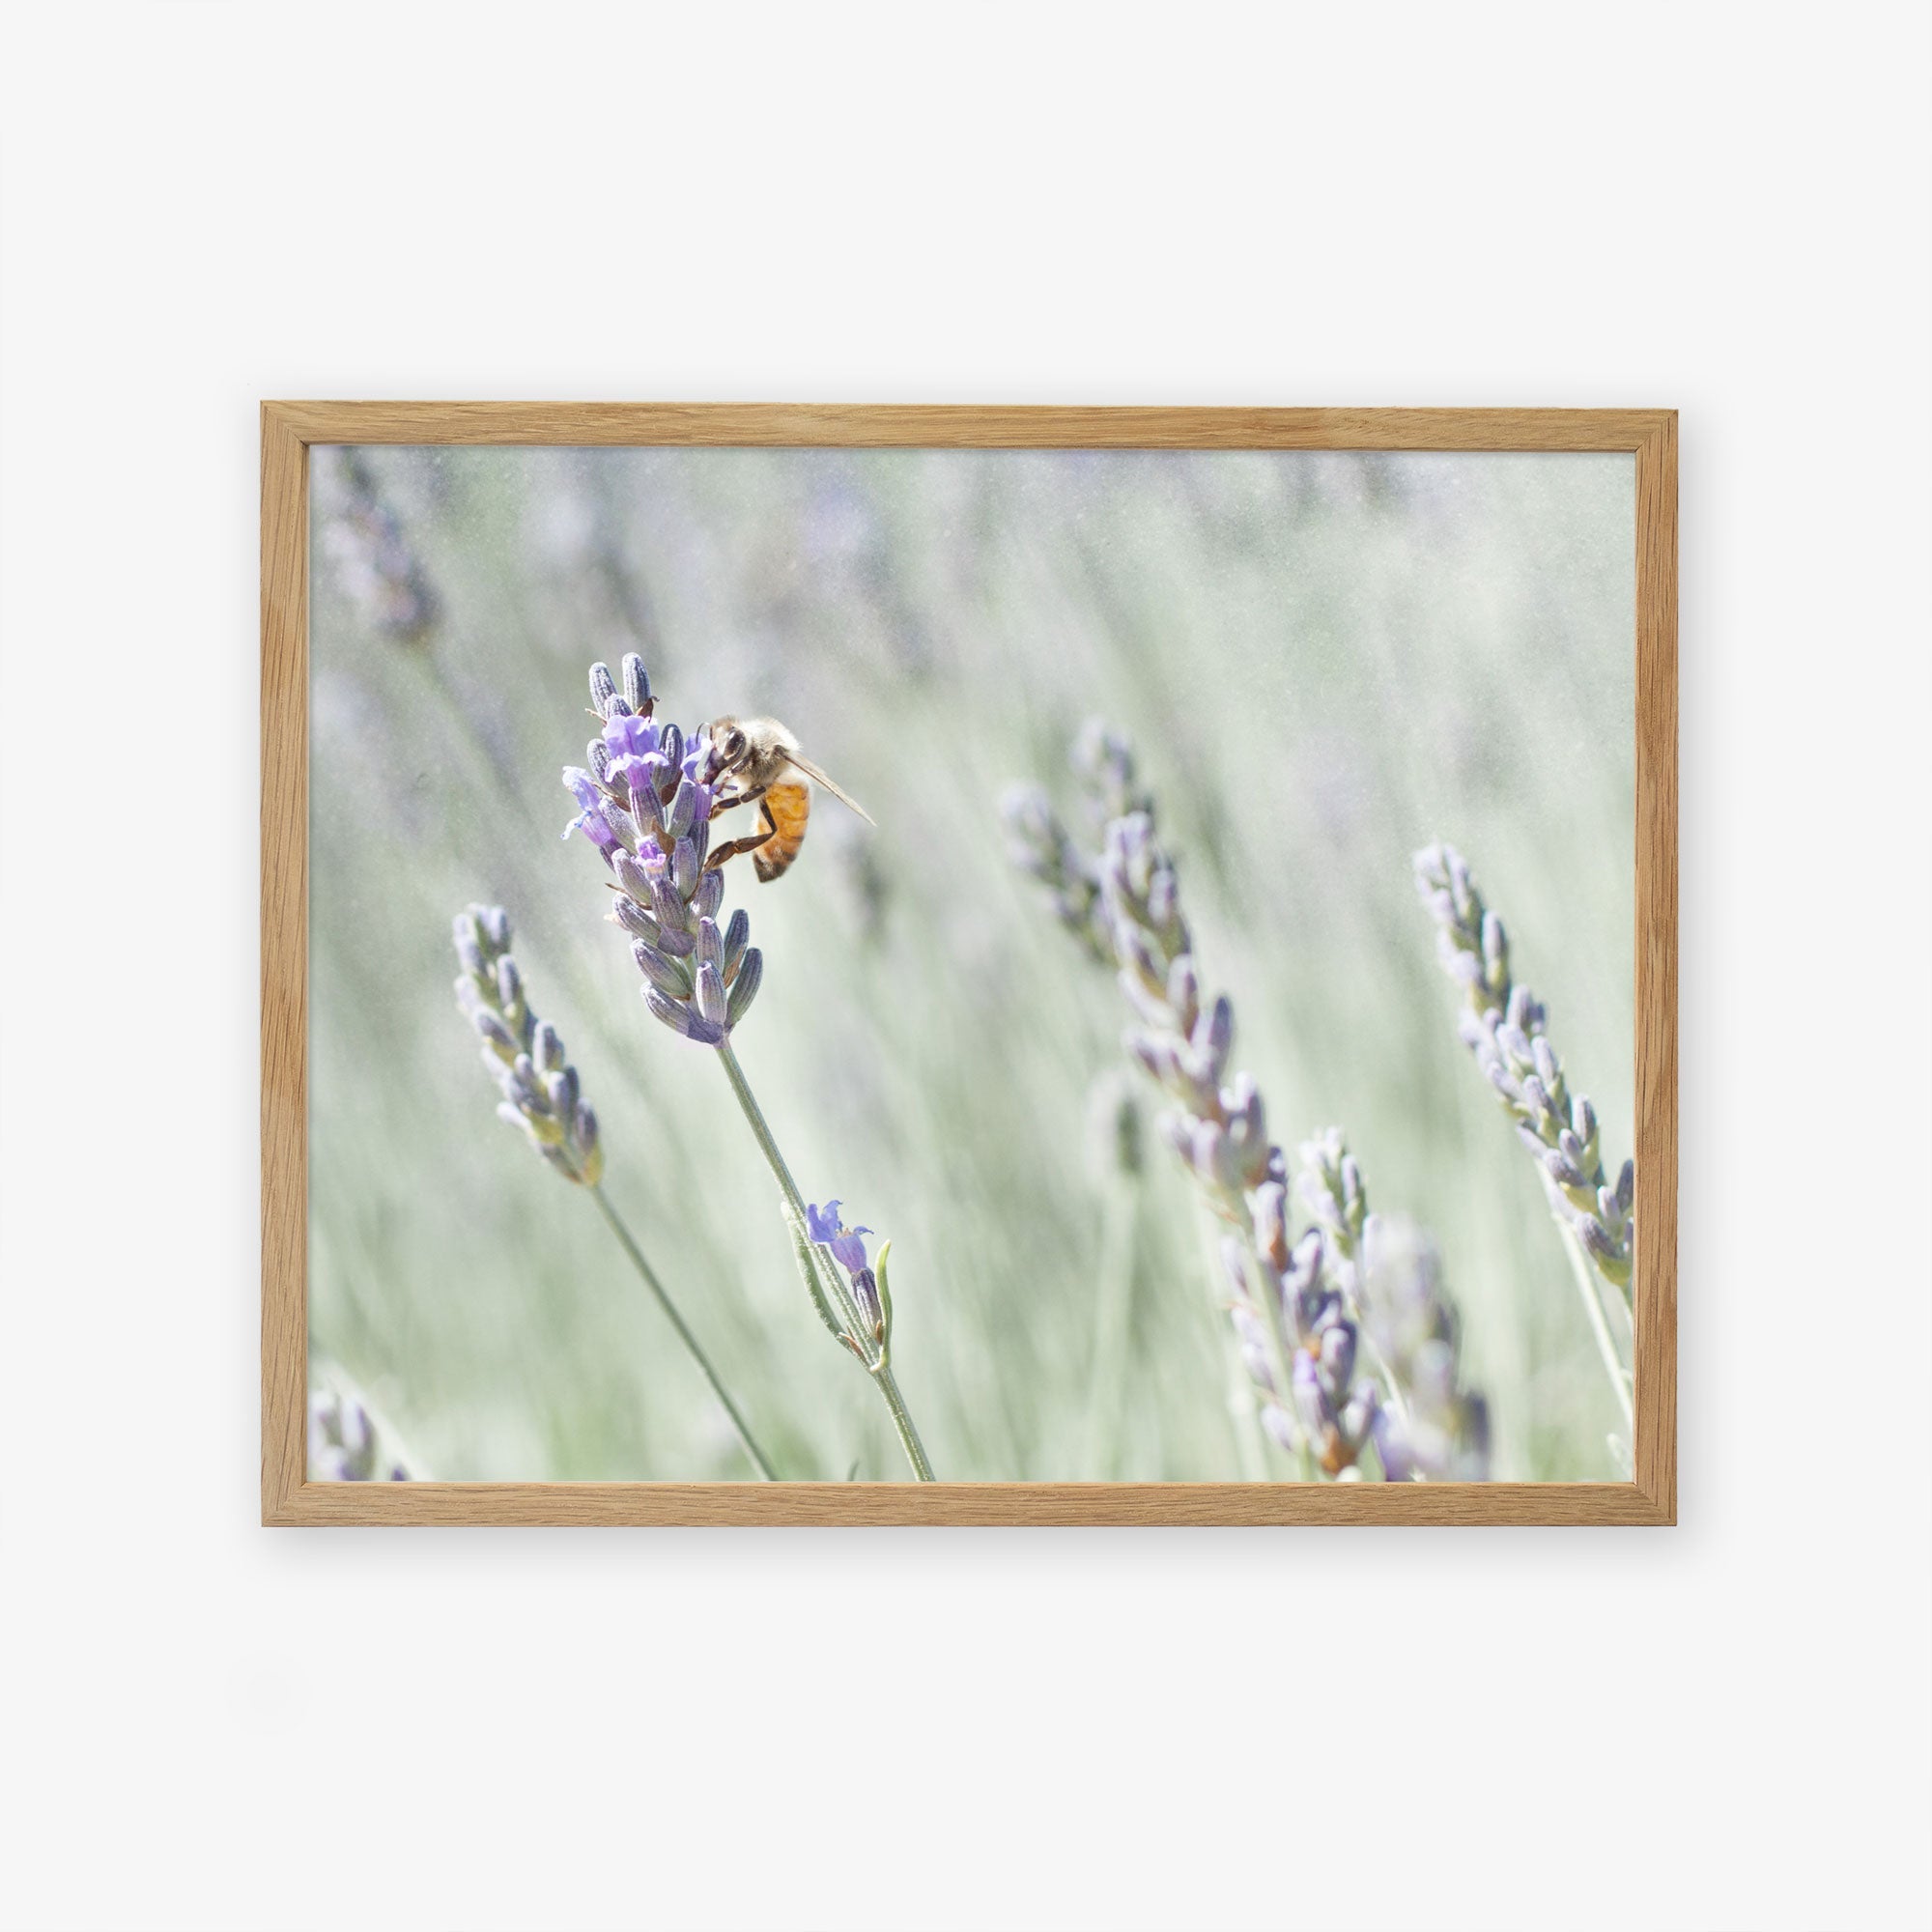 A framed wall art of a bee perched on a lavender stalk, with a blurred background of a lavender farm, showcasing natural colors and a serene setting by Offley Green&#39;s Rustic Floral Print, &#39;Lavender for Bees&#39;.